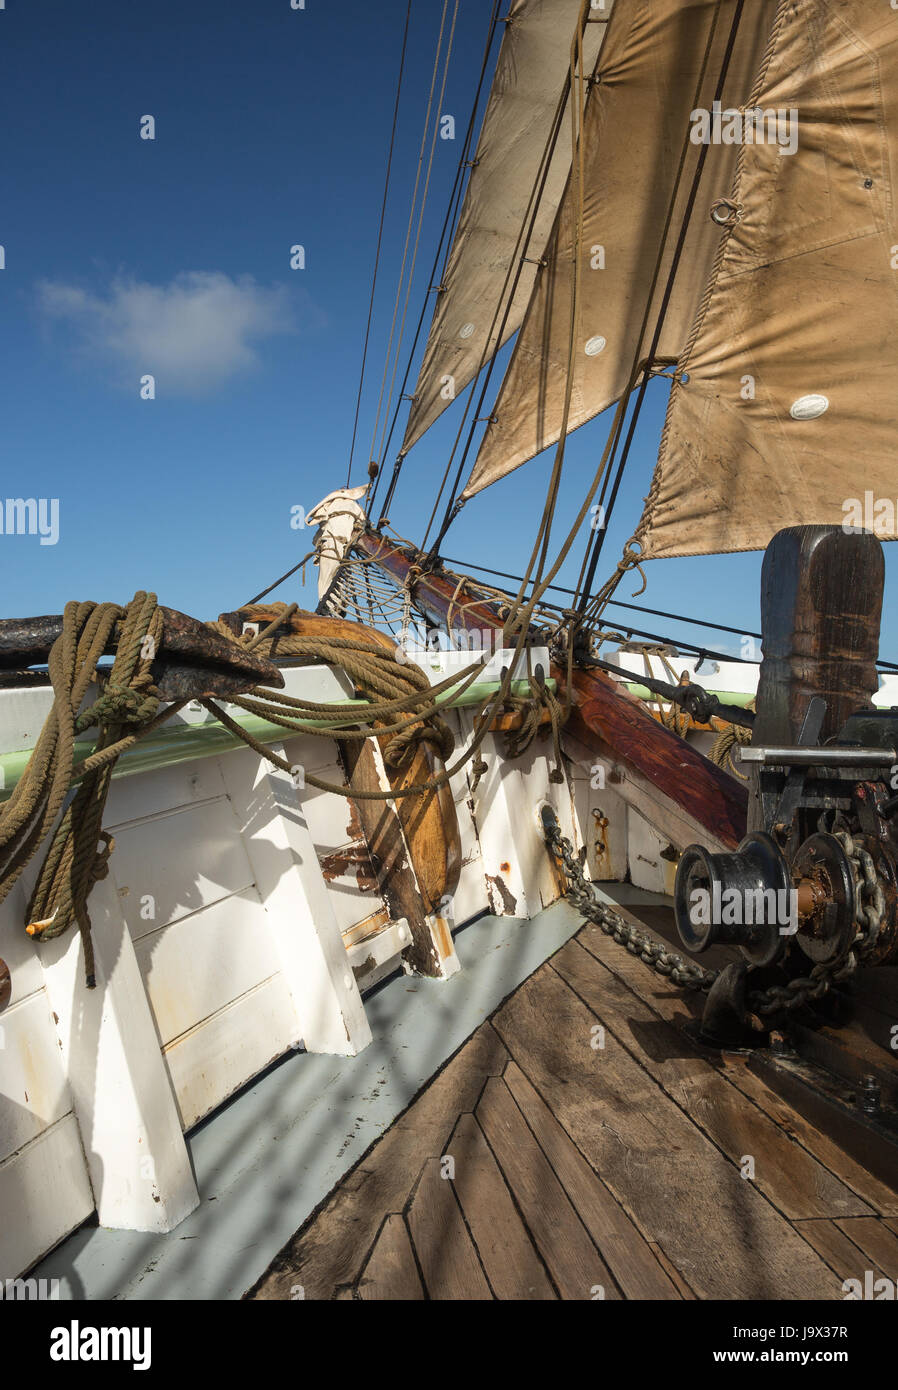 Jib sails and bowsprit on an old sailing ship at sea, taken on a sunny day off the coast of Mull in Scotland Stock Photo